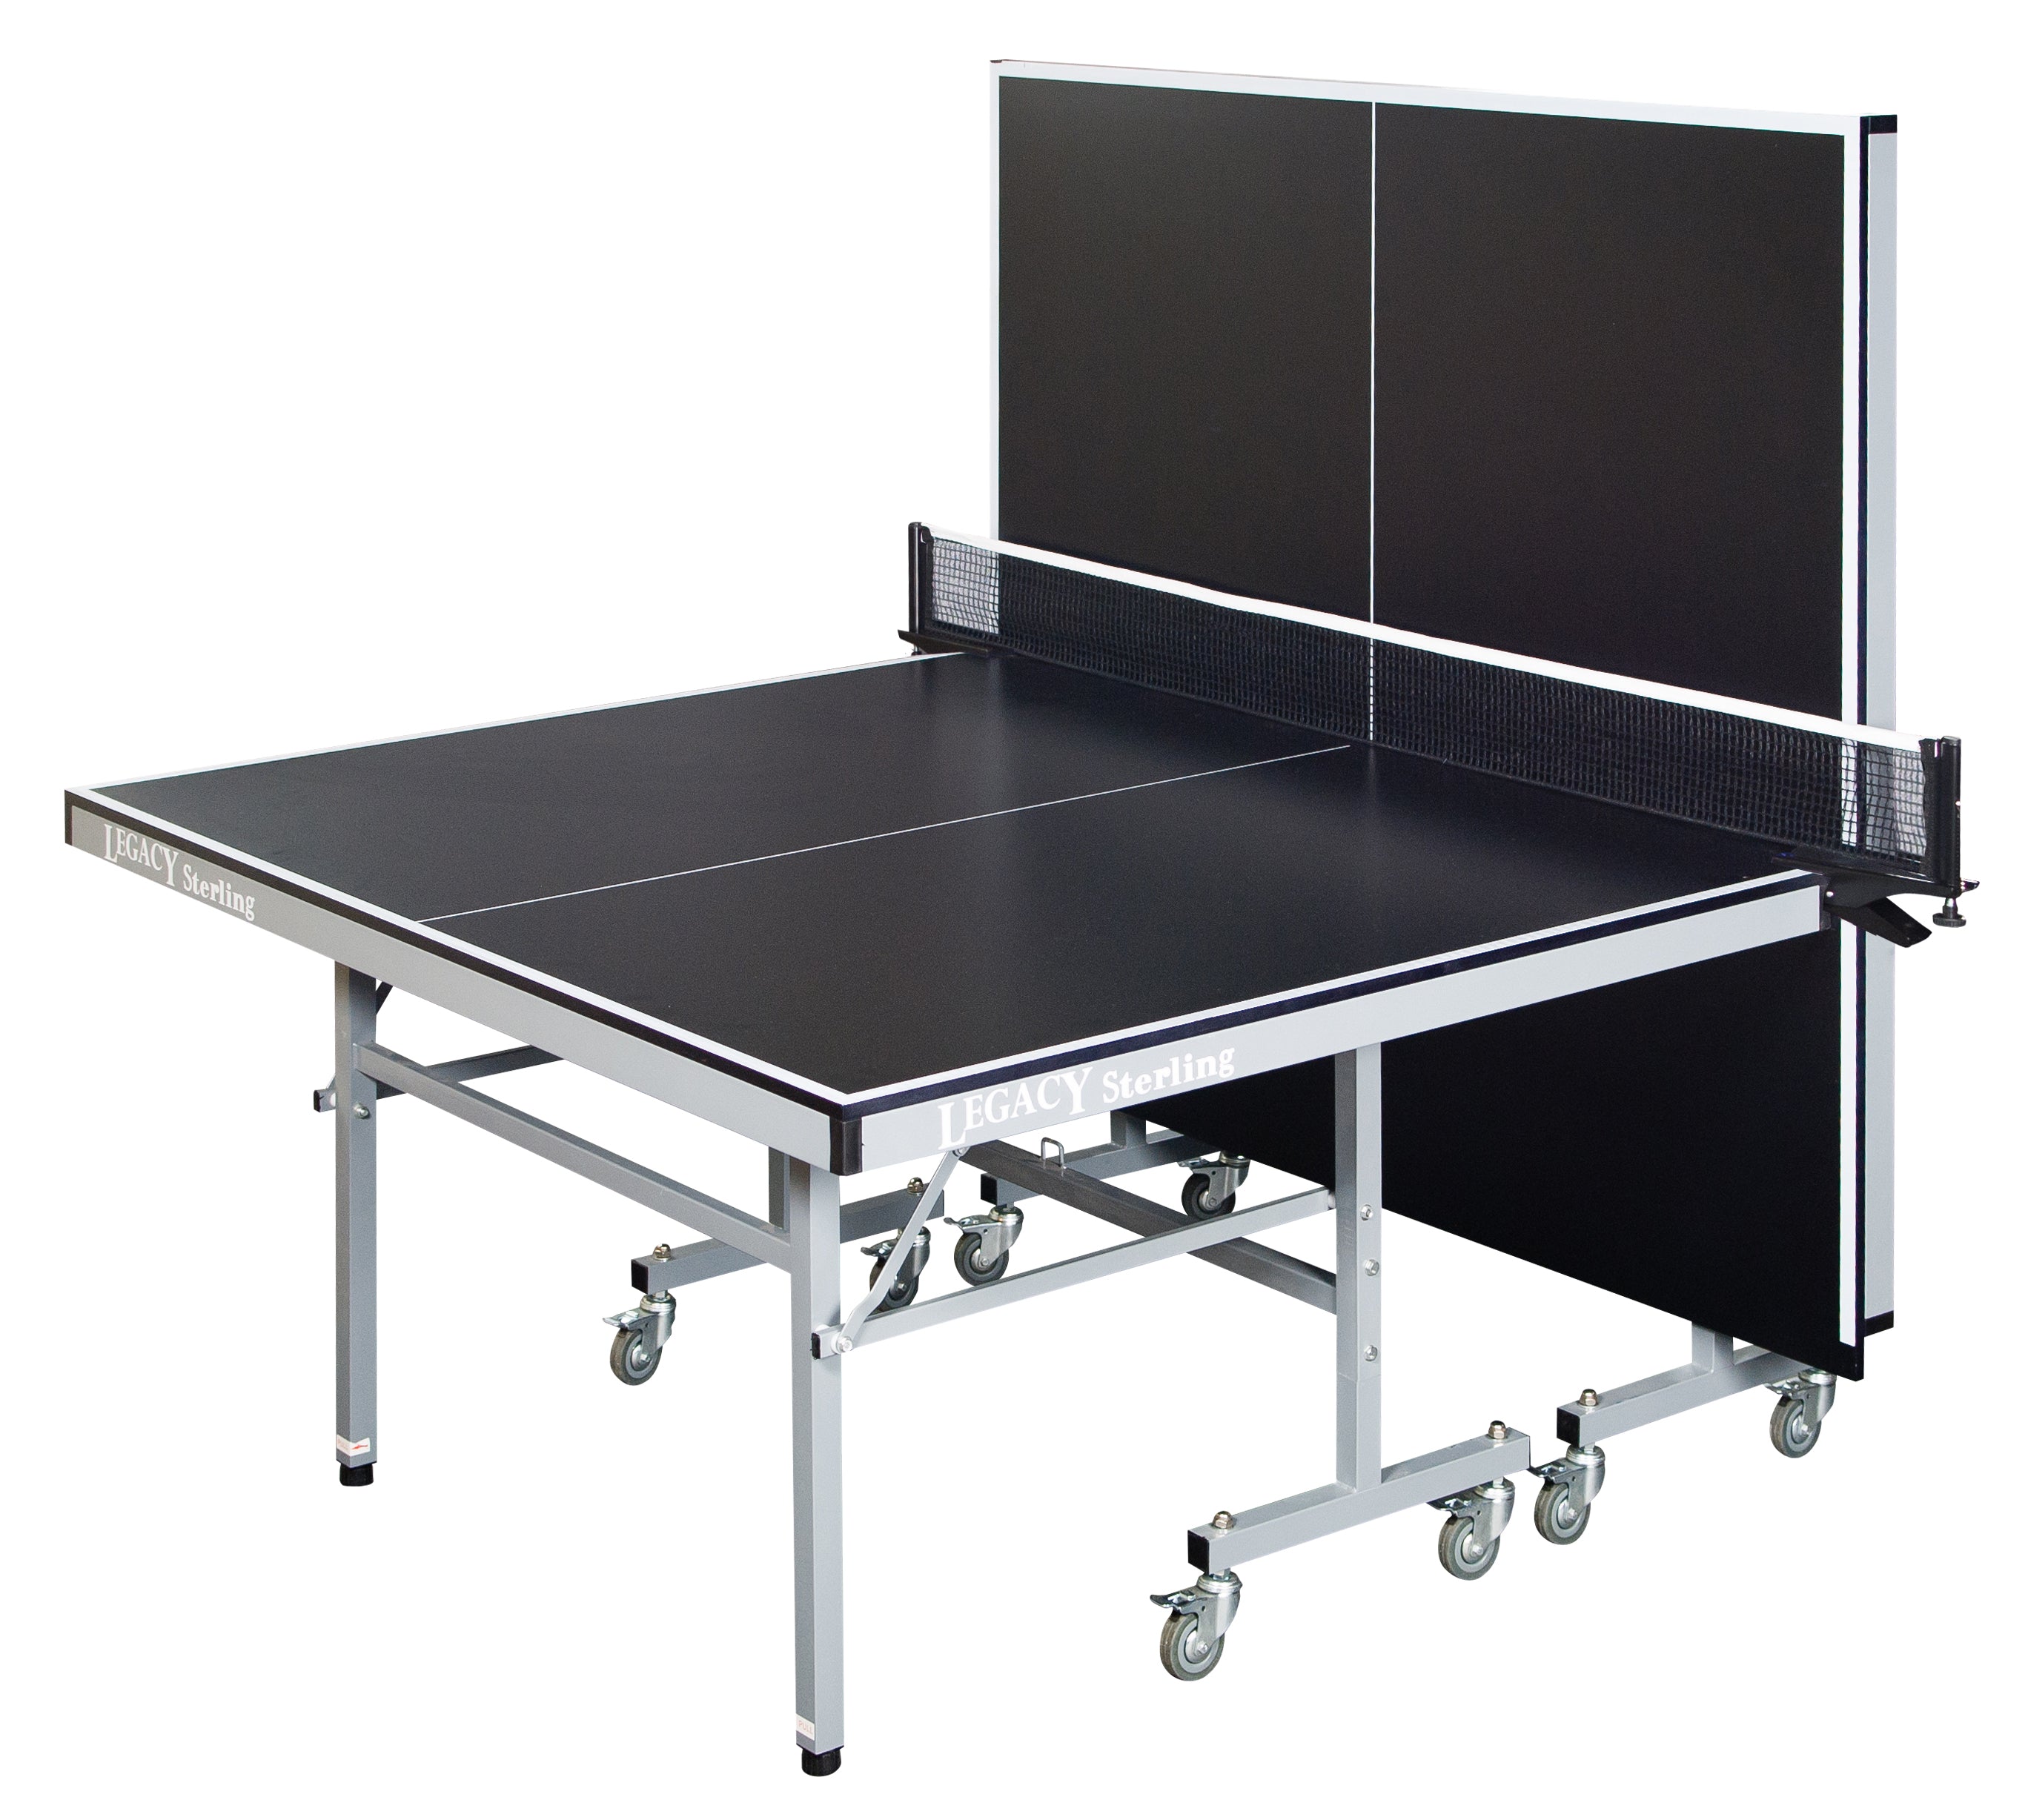 Legacy Billiards Sterling Outdoor Table Tennis Table with One Half Folded Up